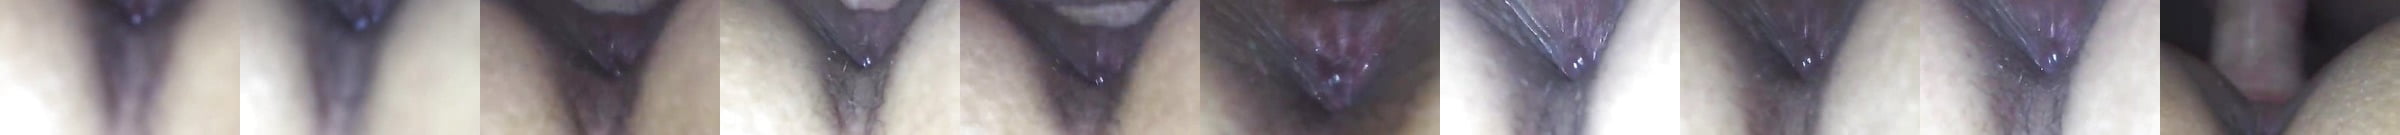 Pinay Michelle From Dubai Getting Pussy And Ass Fucked Wk1 Xhamster